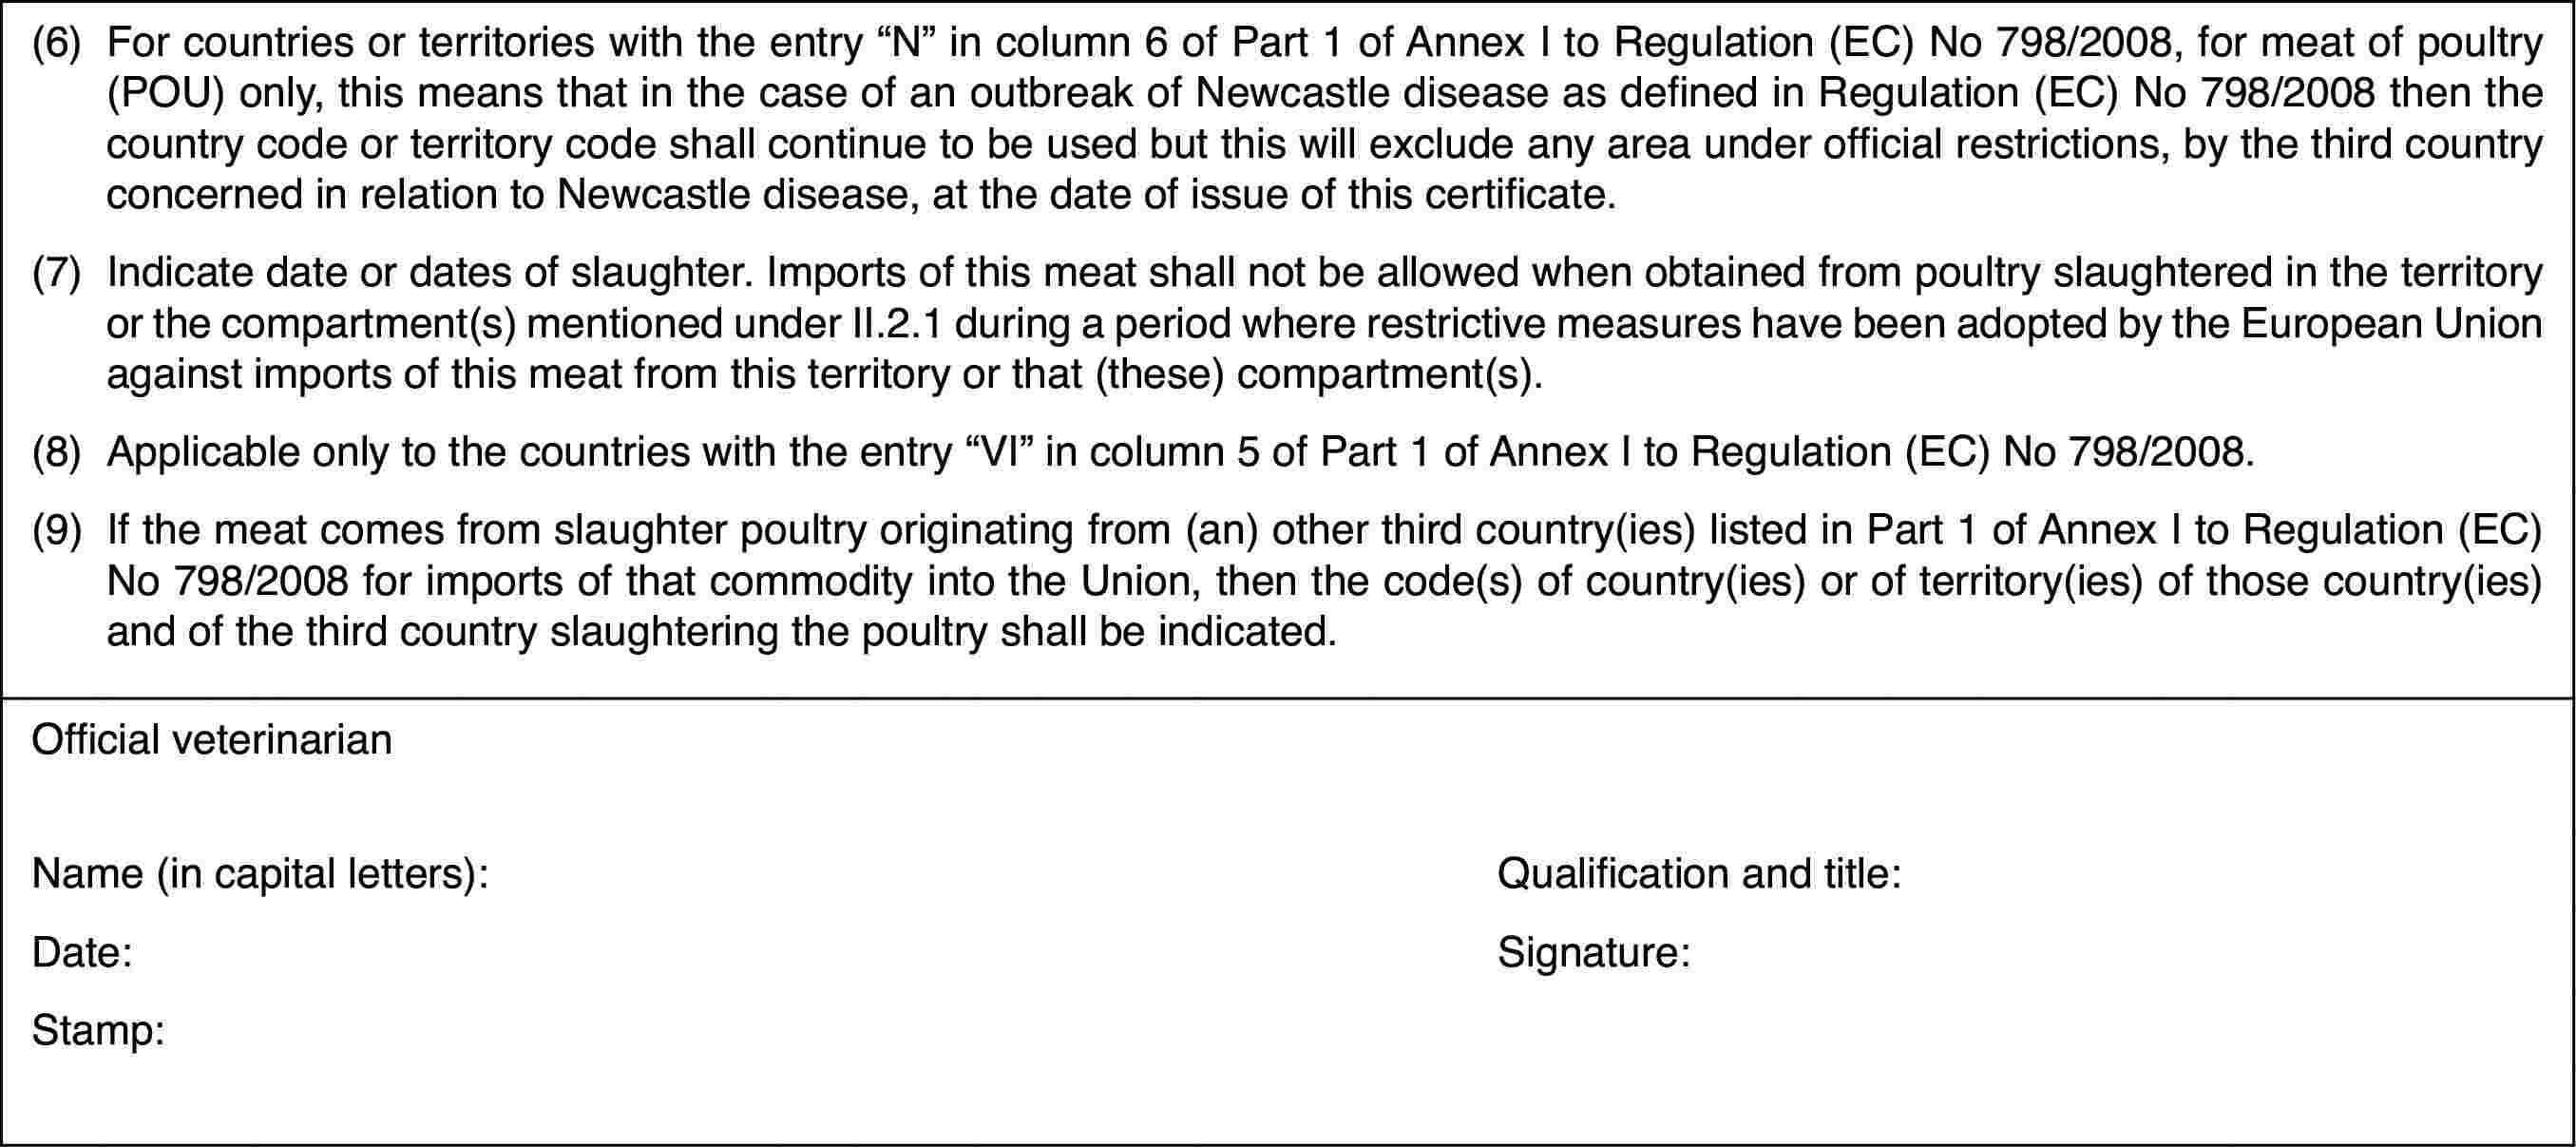 (6)For countries or territories with the entry “N” in column 6 of Part1 of Annex I to Regulation (EC) No 798/2008, for meat of poultry (POU) only,this means that in the case of an outbreak of Newcastle disease as definedin Regulation (EC) No 798/2008 then the country code or territory code shallcontinue to be used but this will exclude any area under official restrictions,by the third country concerned in relation to Newcastle disease, at the dateof issue of this certificate.(7)Indicate date ordates of slaughter. Imports of this meat shall not be allowed when obtainedfrom poultry slaughtered in the territory or the compartment(s) mentionedunder II.2.1 during a period where restrictive measures have been adoptedby the European Union against imports of this meat from this territory orthat (these) compartment(s).(8)Applicableonly to the countries with the entry “VI” incolumn 5 of Part 1 of Annex I to Regulation(EC) No 798/2008.(9)Ifthe meat comes from slaughter poultry originating from (an) other third country(ies)listed in Part 1 of Annex I toRegulation (EC) No 798/2008 for imports of that commodity into the Union,then the code(s) of country(ies) or of territory(ies) of those country(ies)and of the third country slaughtering the poultry shall be indicated.Official veterinarianName (in capitalletters):Qualification and title:Date:Signature:Stamp: